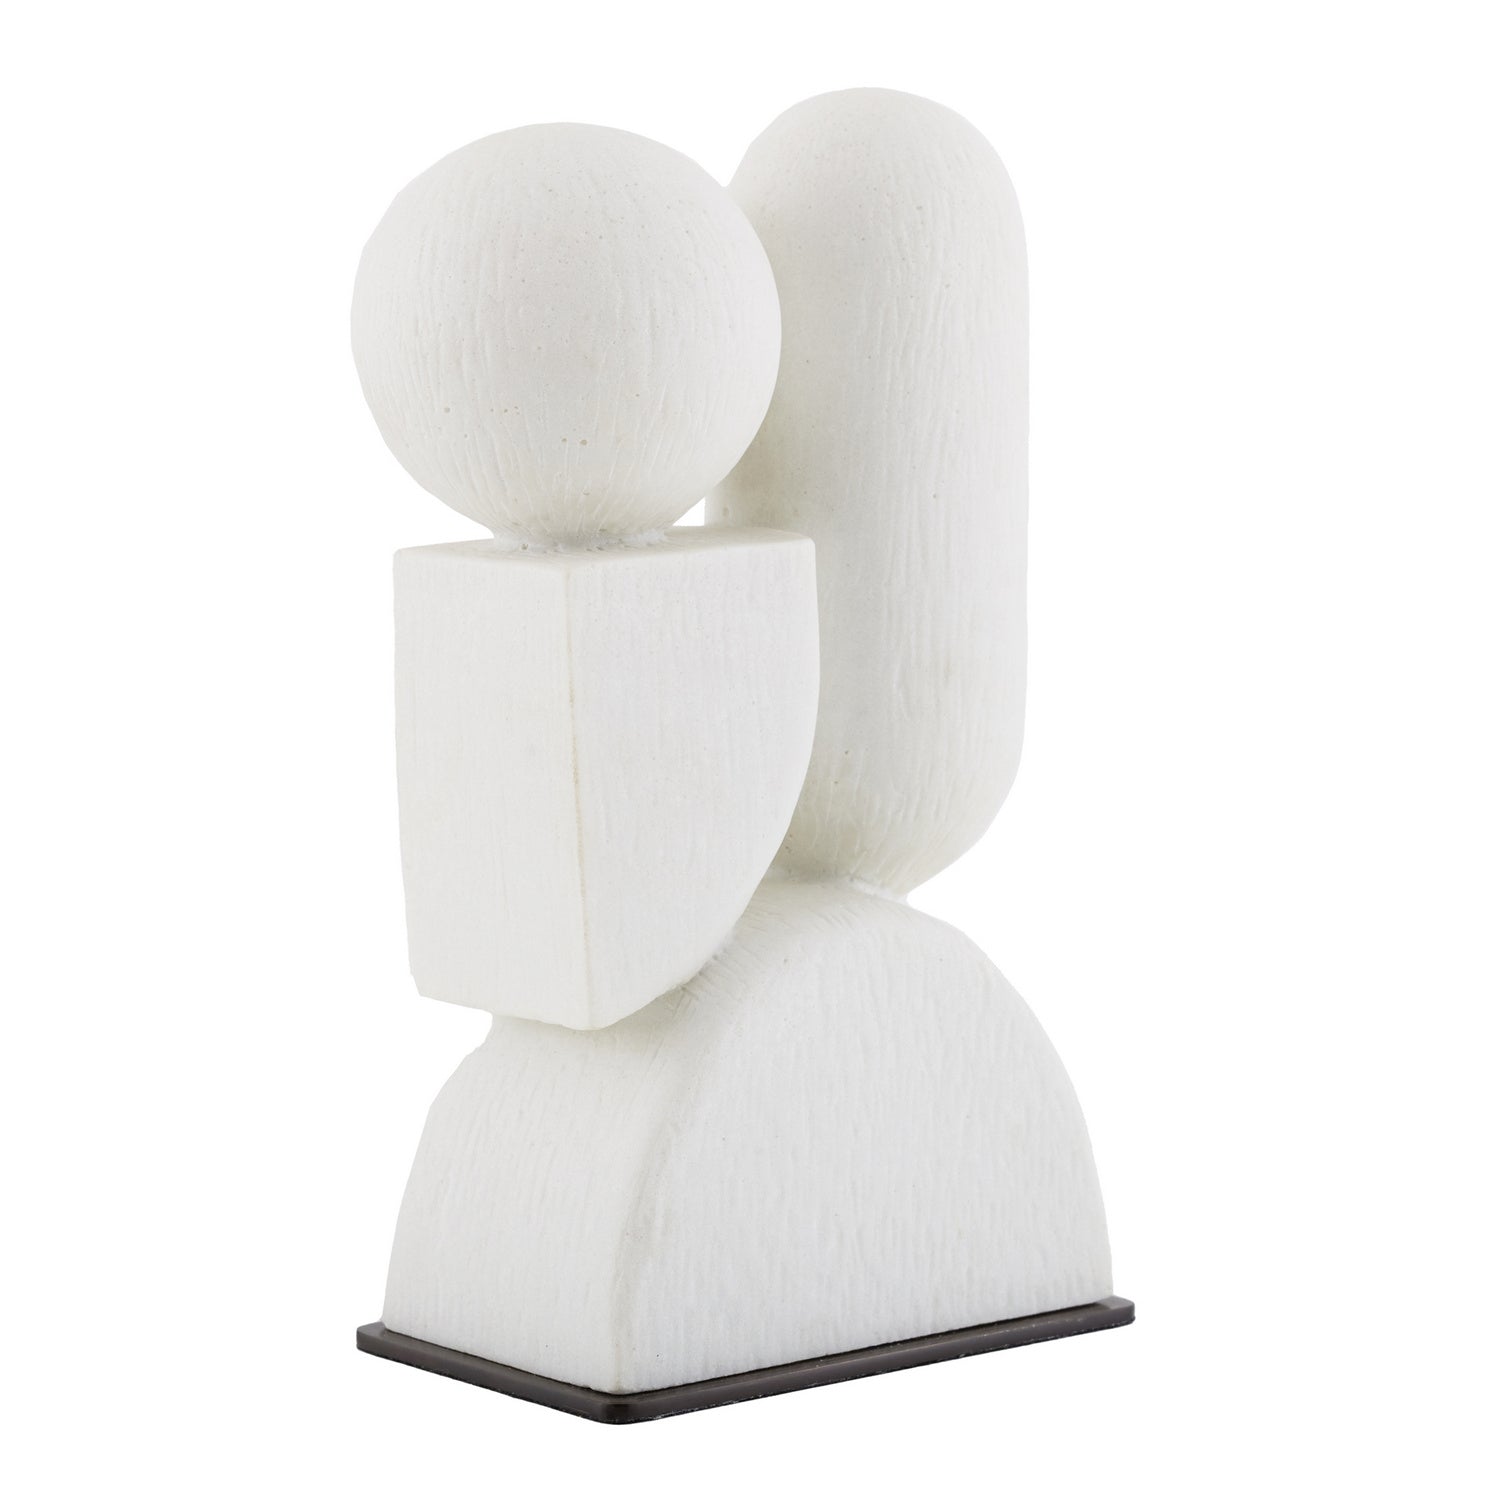 Sculpture from the Poza collection in Ivory finish